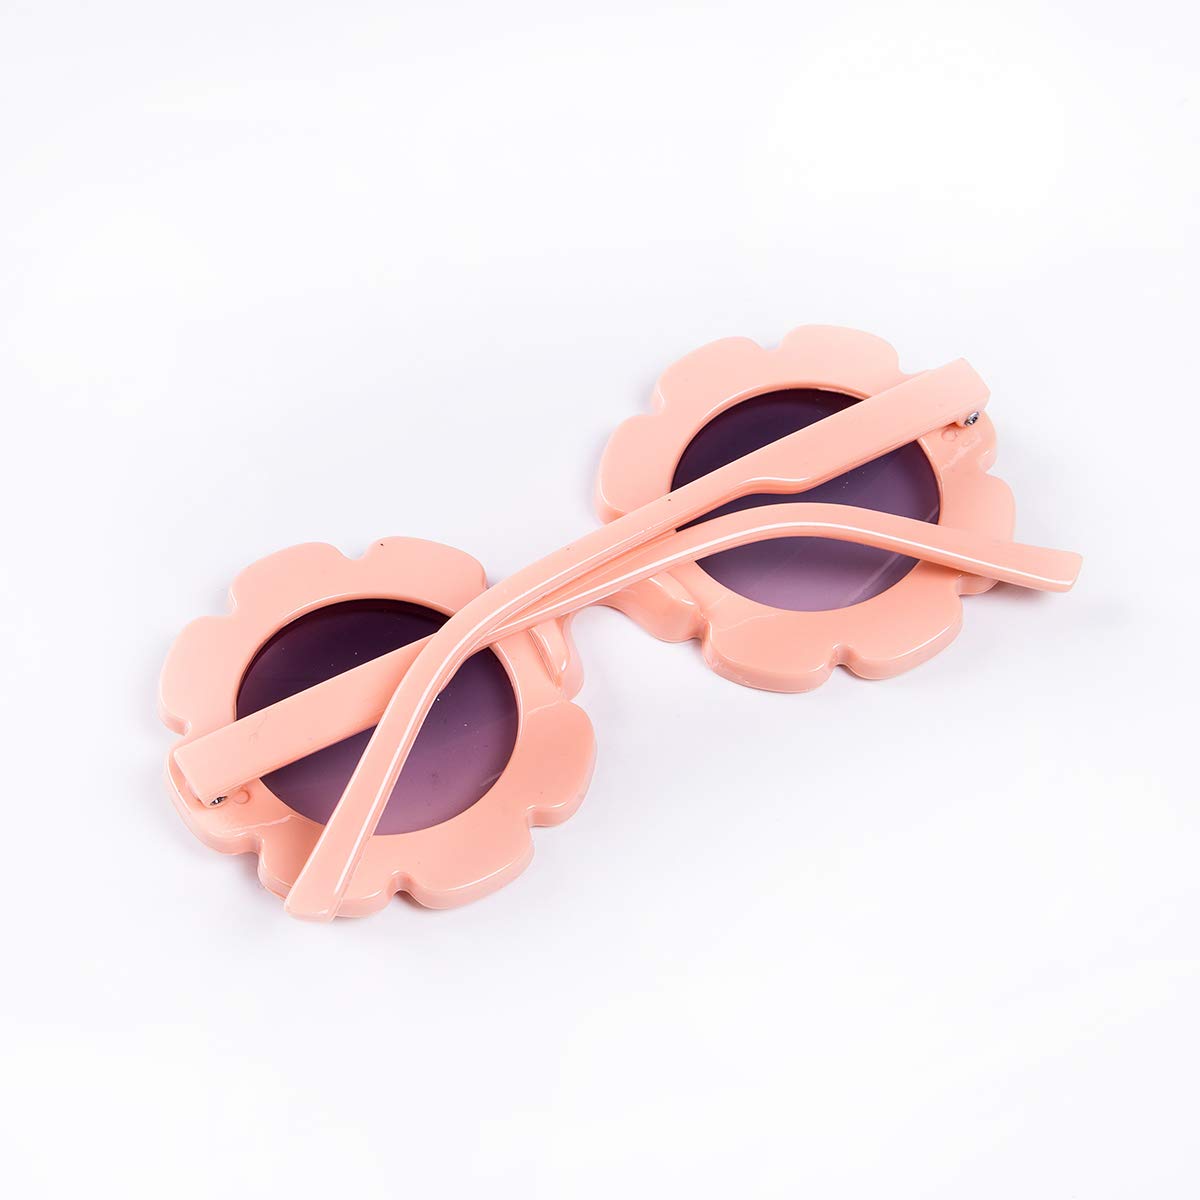 Cute Kids Toddler Baby Round Flower Sunglasses UV Protection Colorful Sunnies Glasses for Boys Girls 0-8T - Orange - image 3 of 7